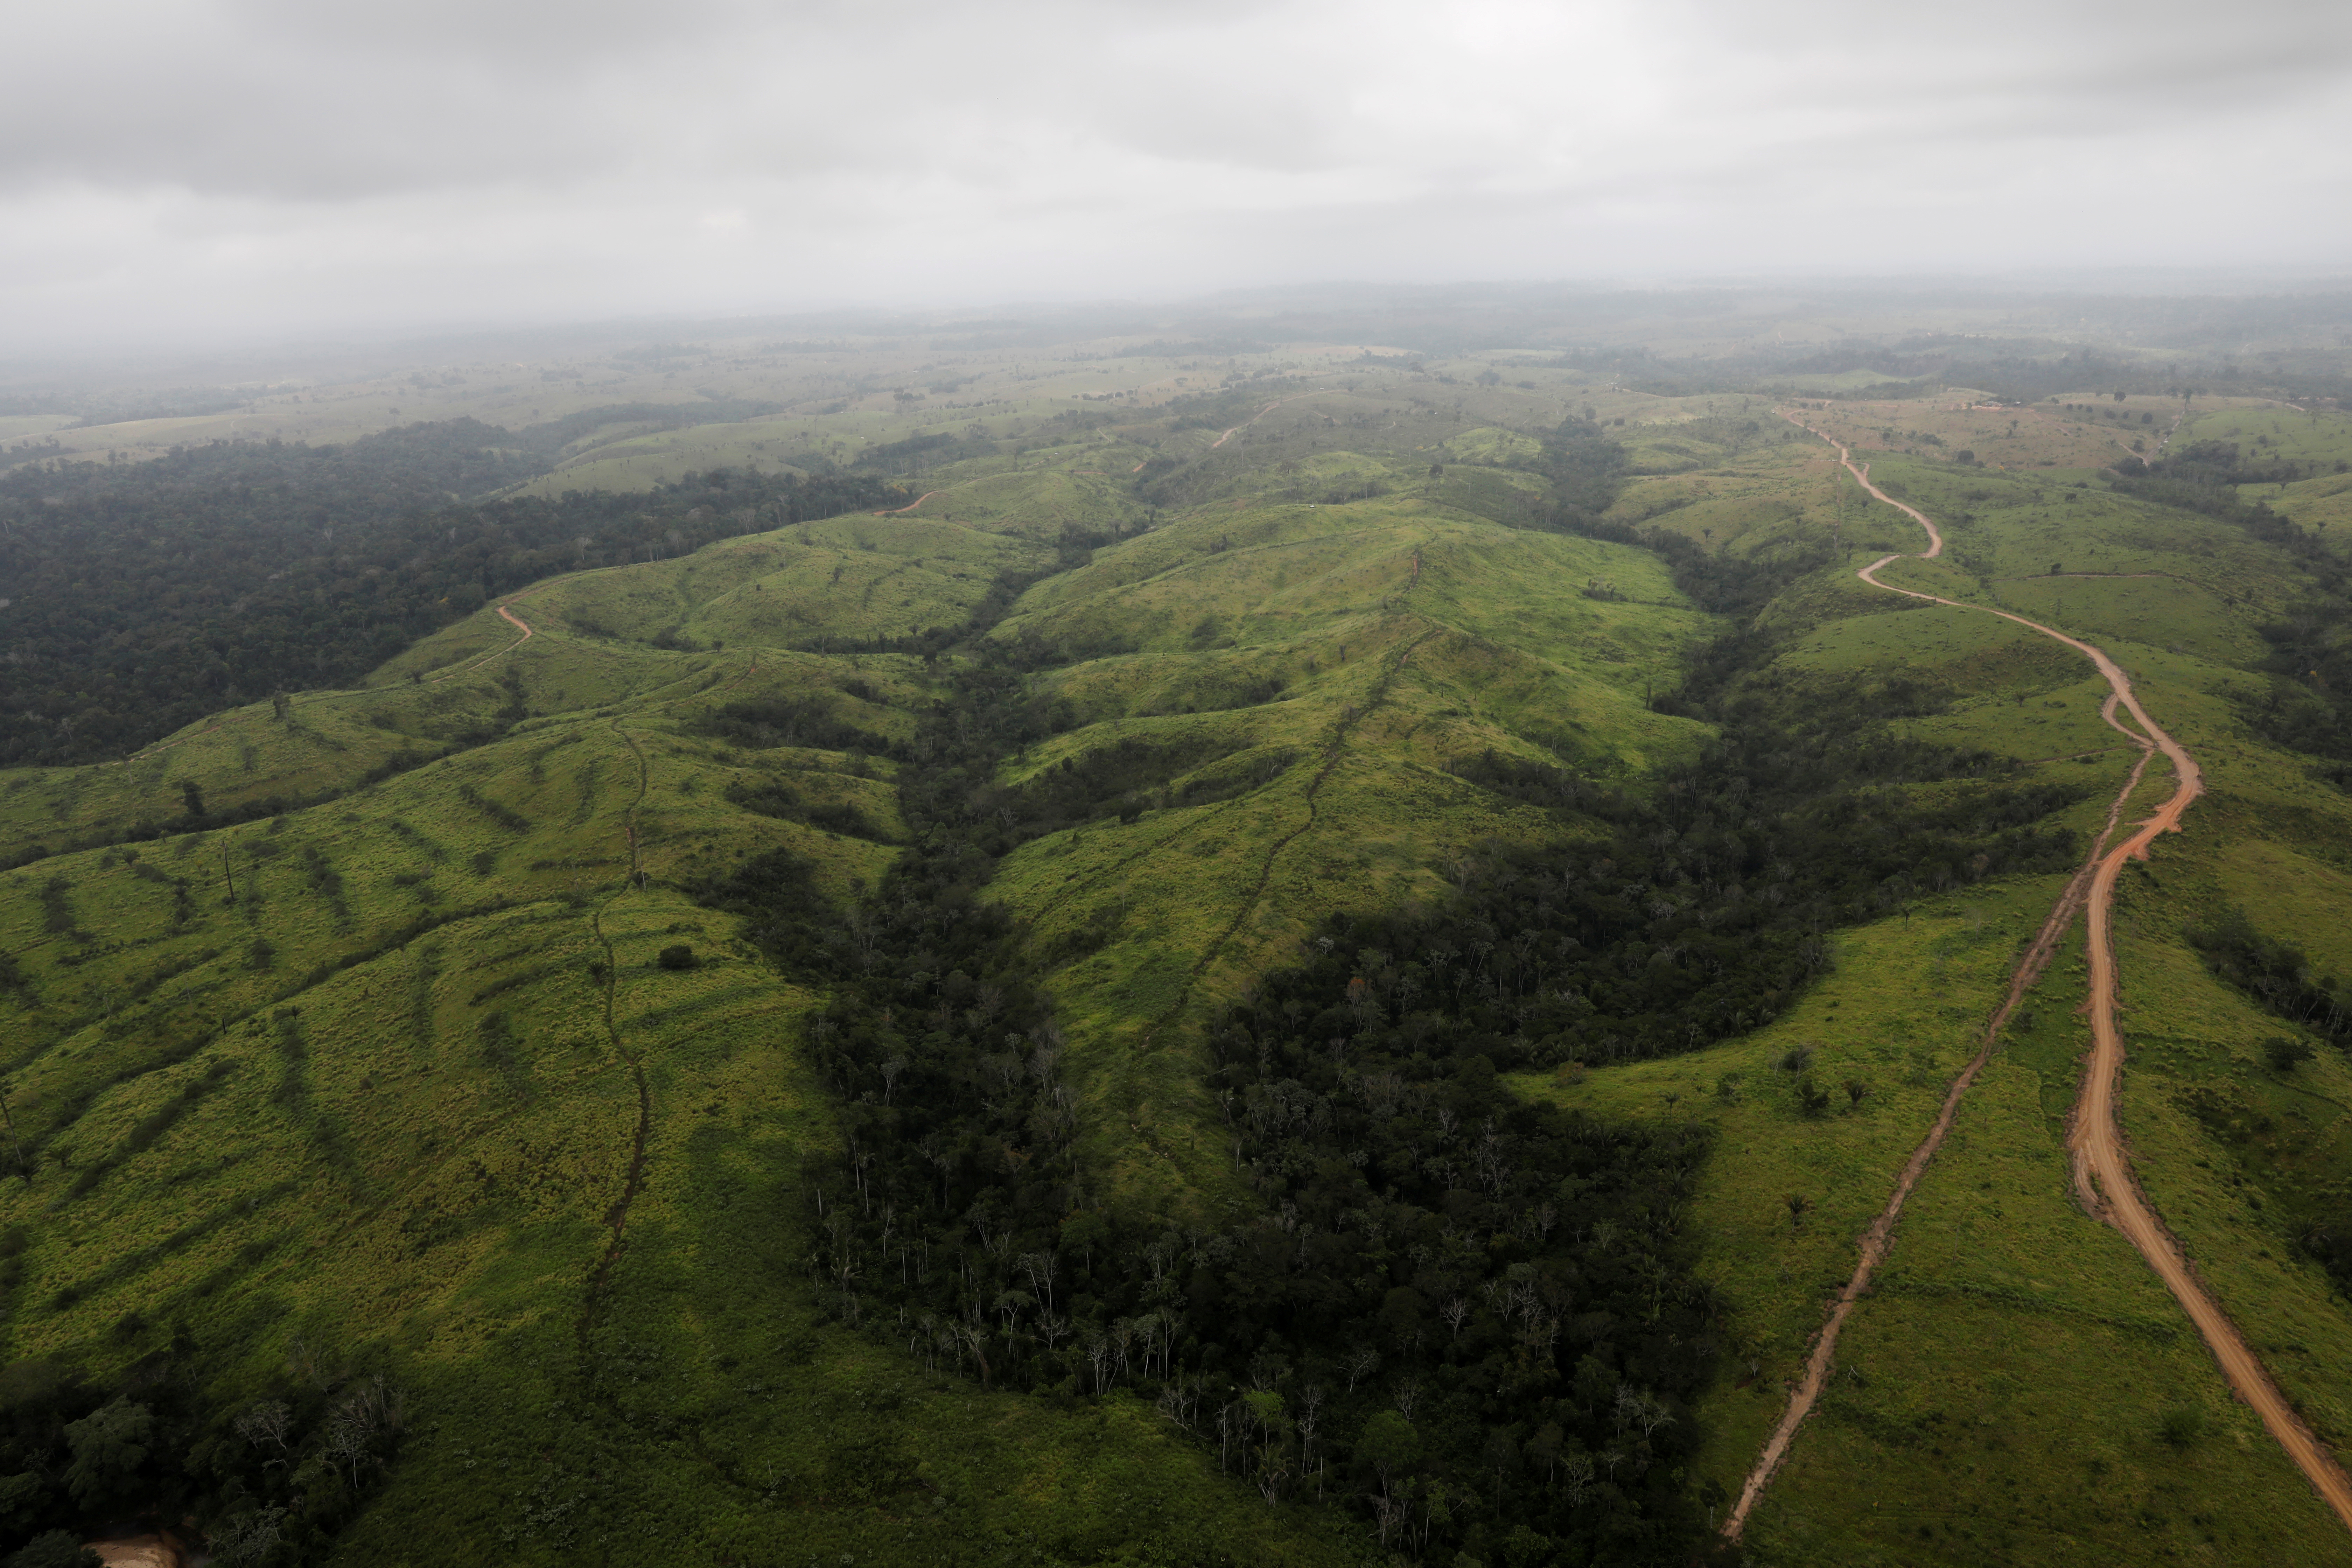 An aerial view shows a deforested area in the Amazon rainforest, near the city of Altamira